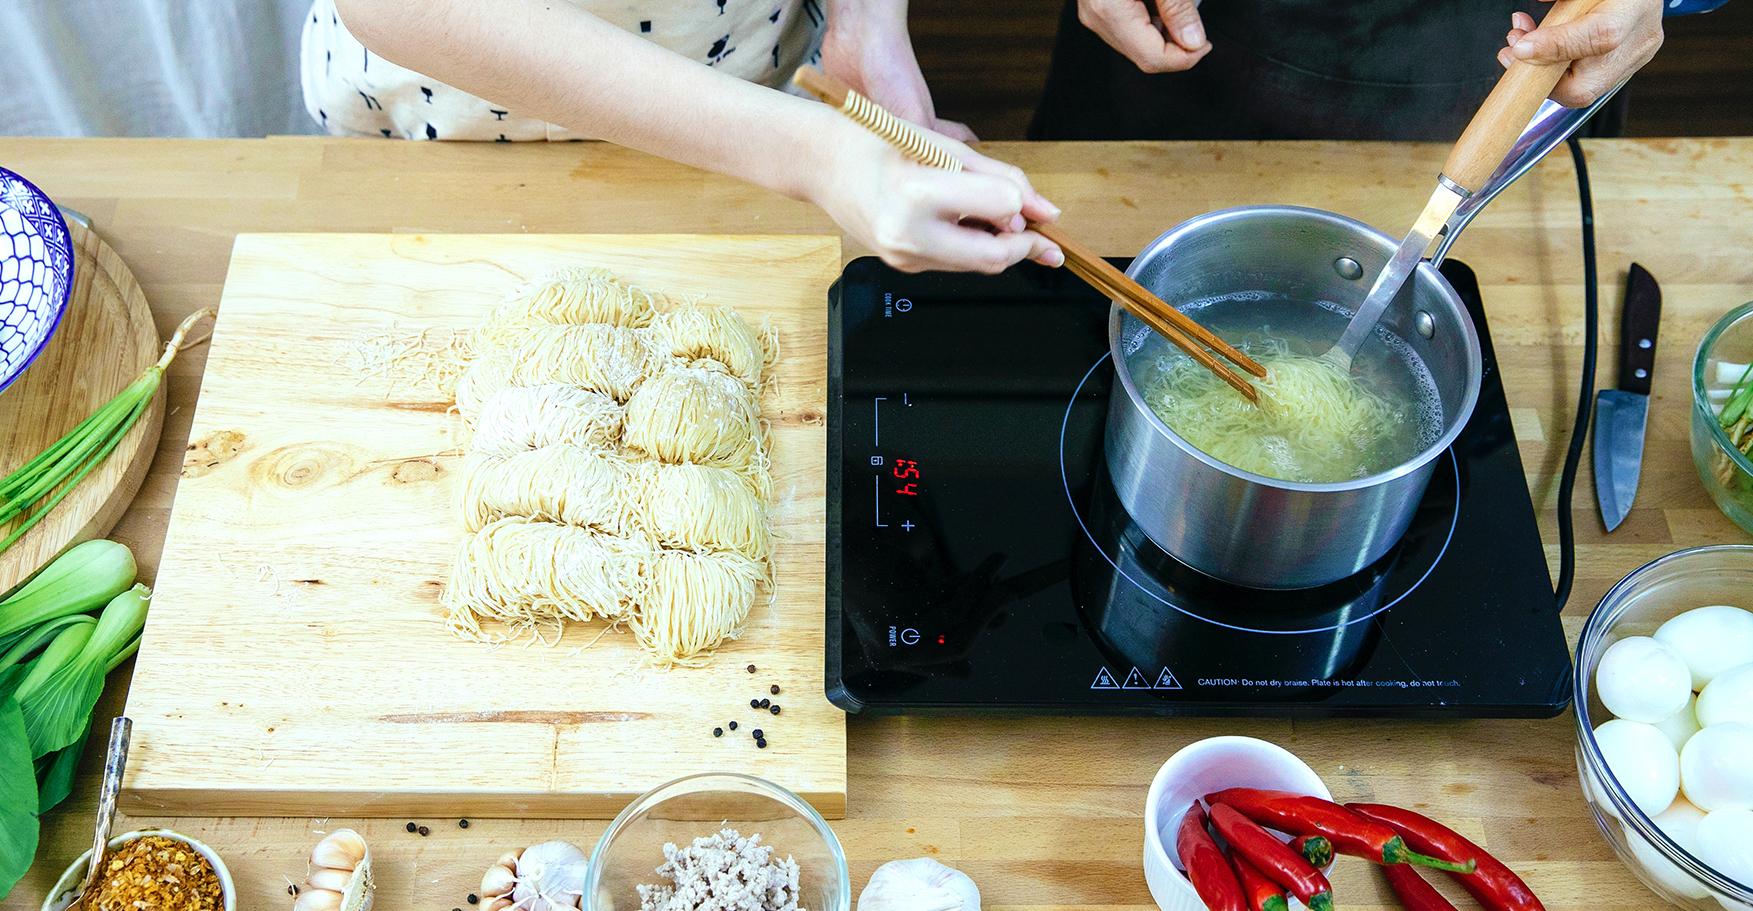 Two women cooking noodles on an induction cooktop